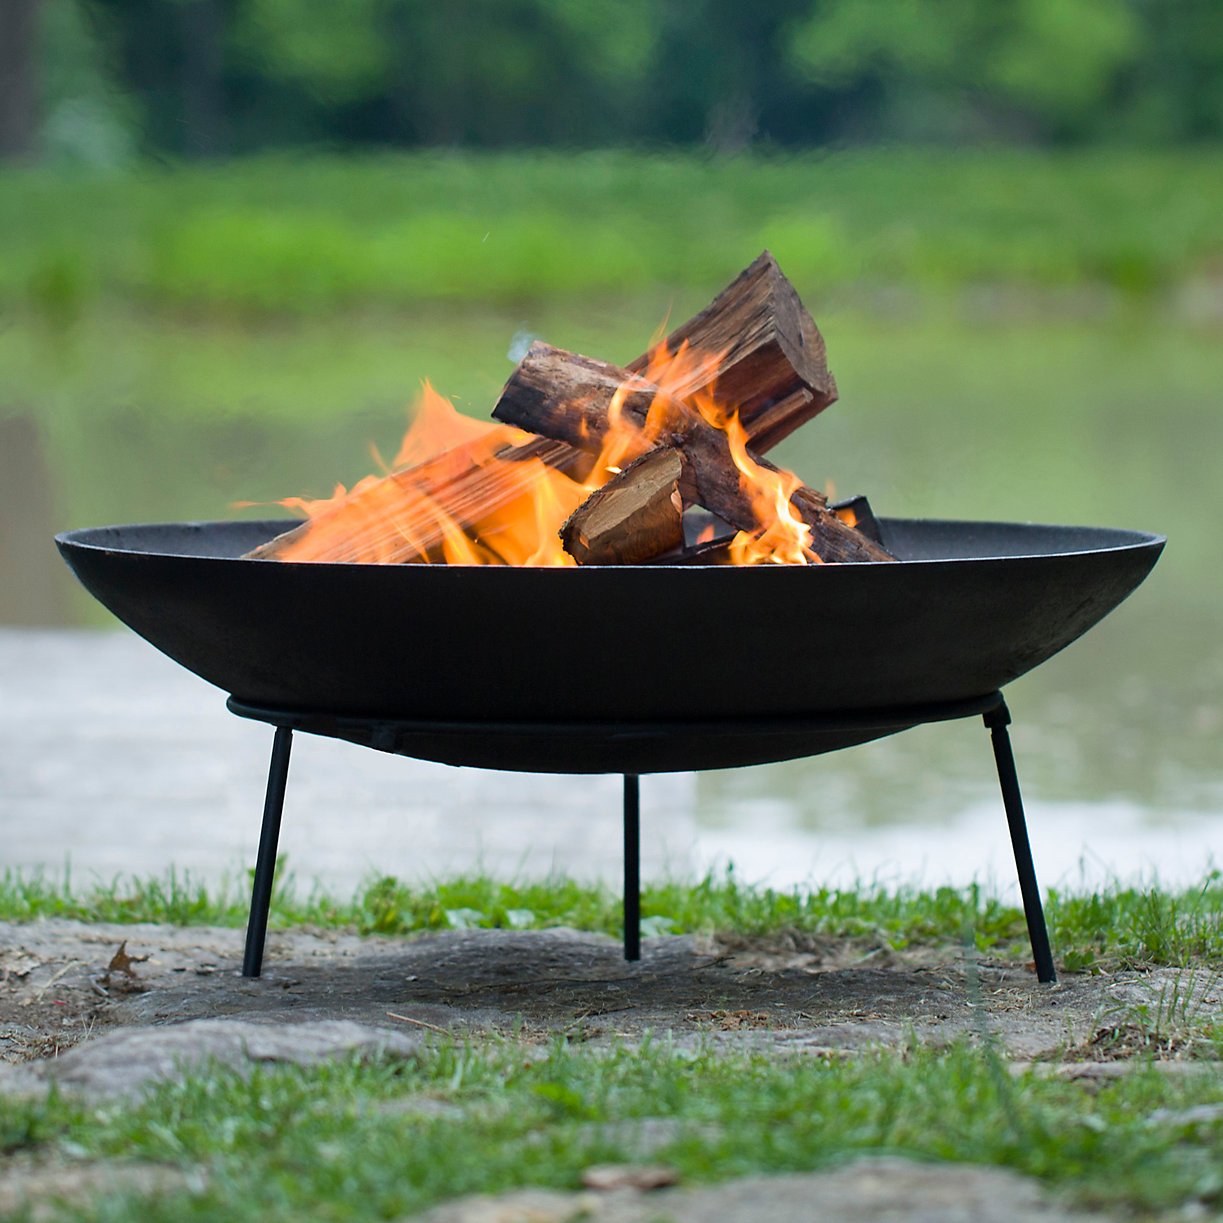 Fire Pit General Topics Asean Now, Fire Pit Disc